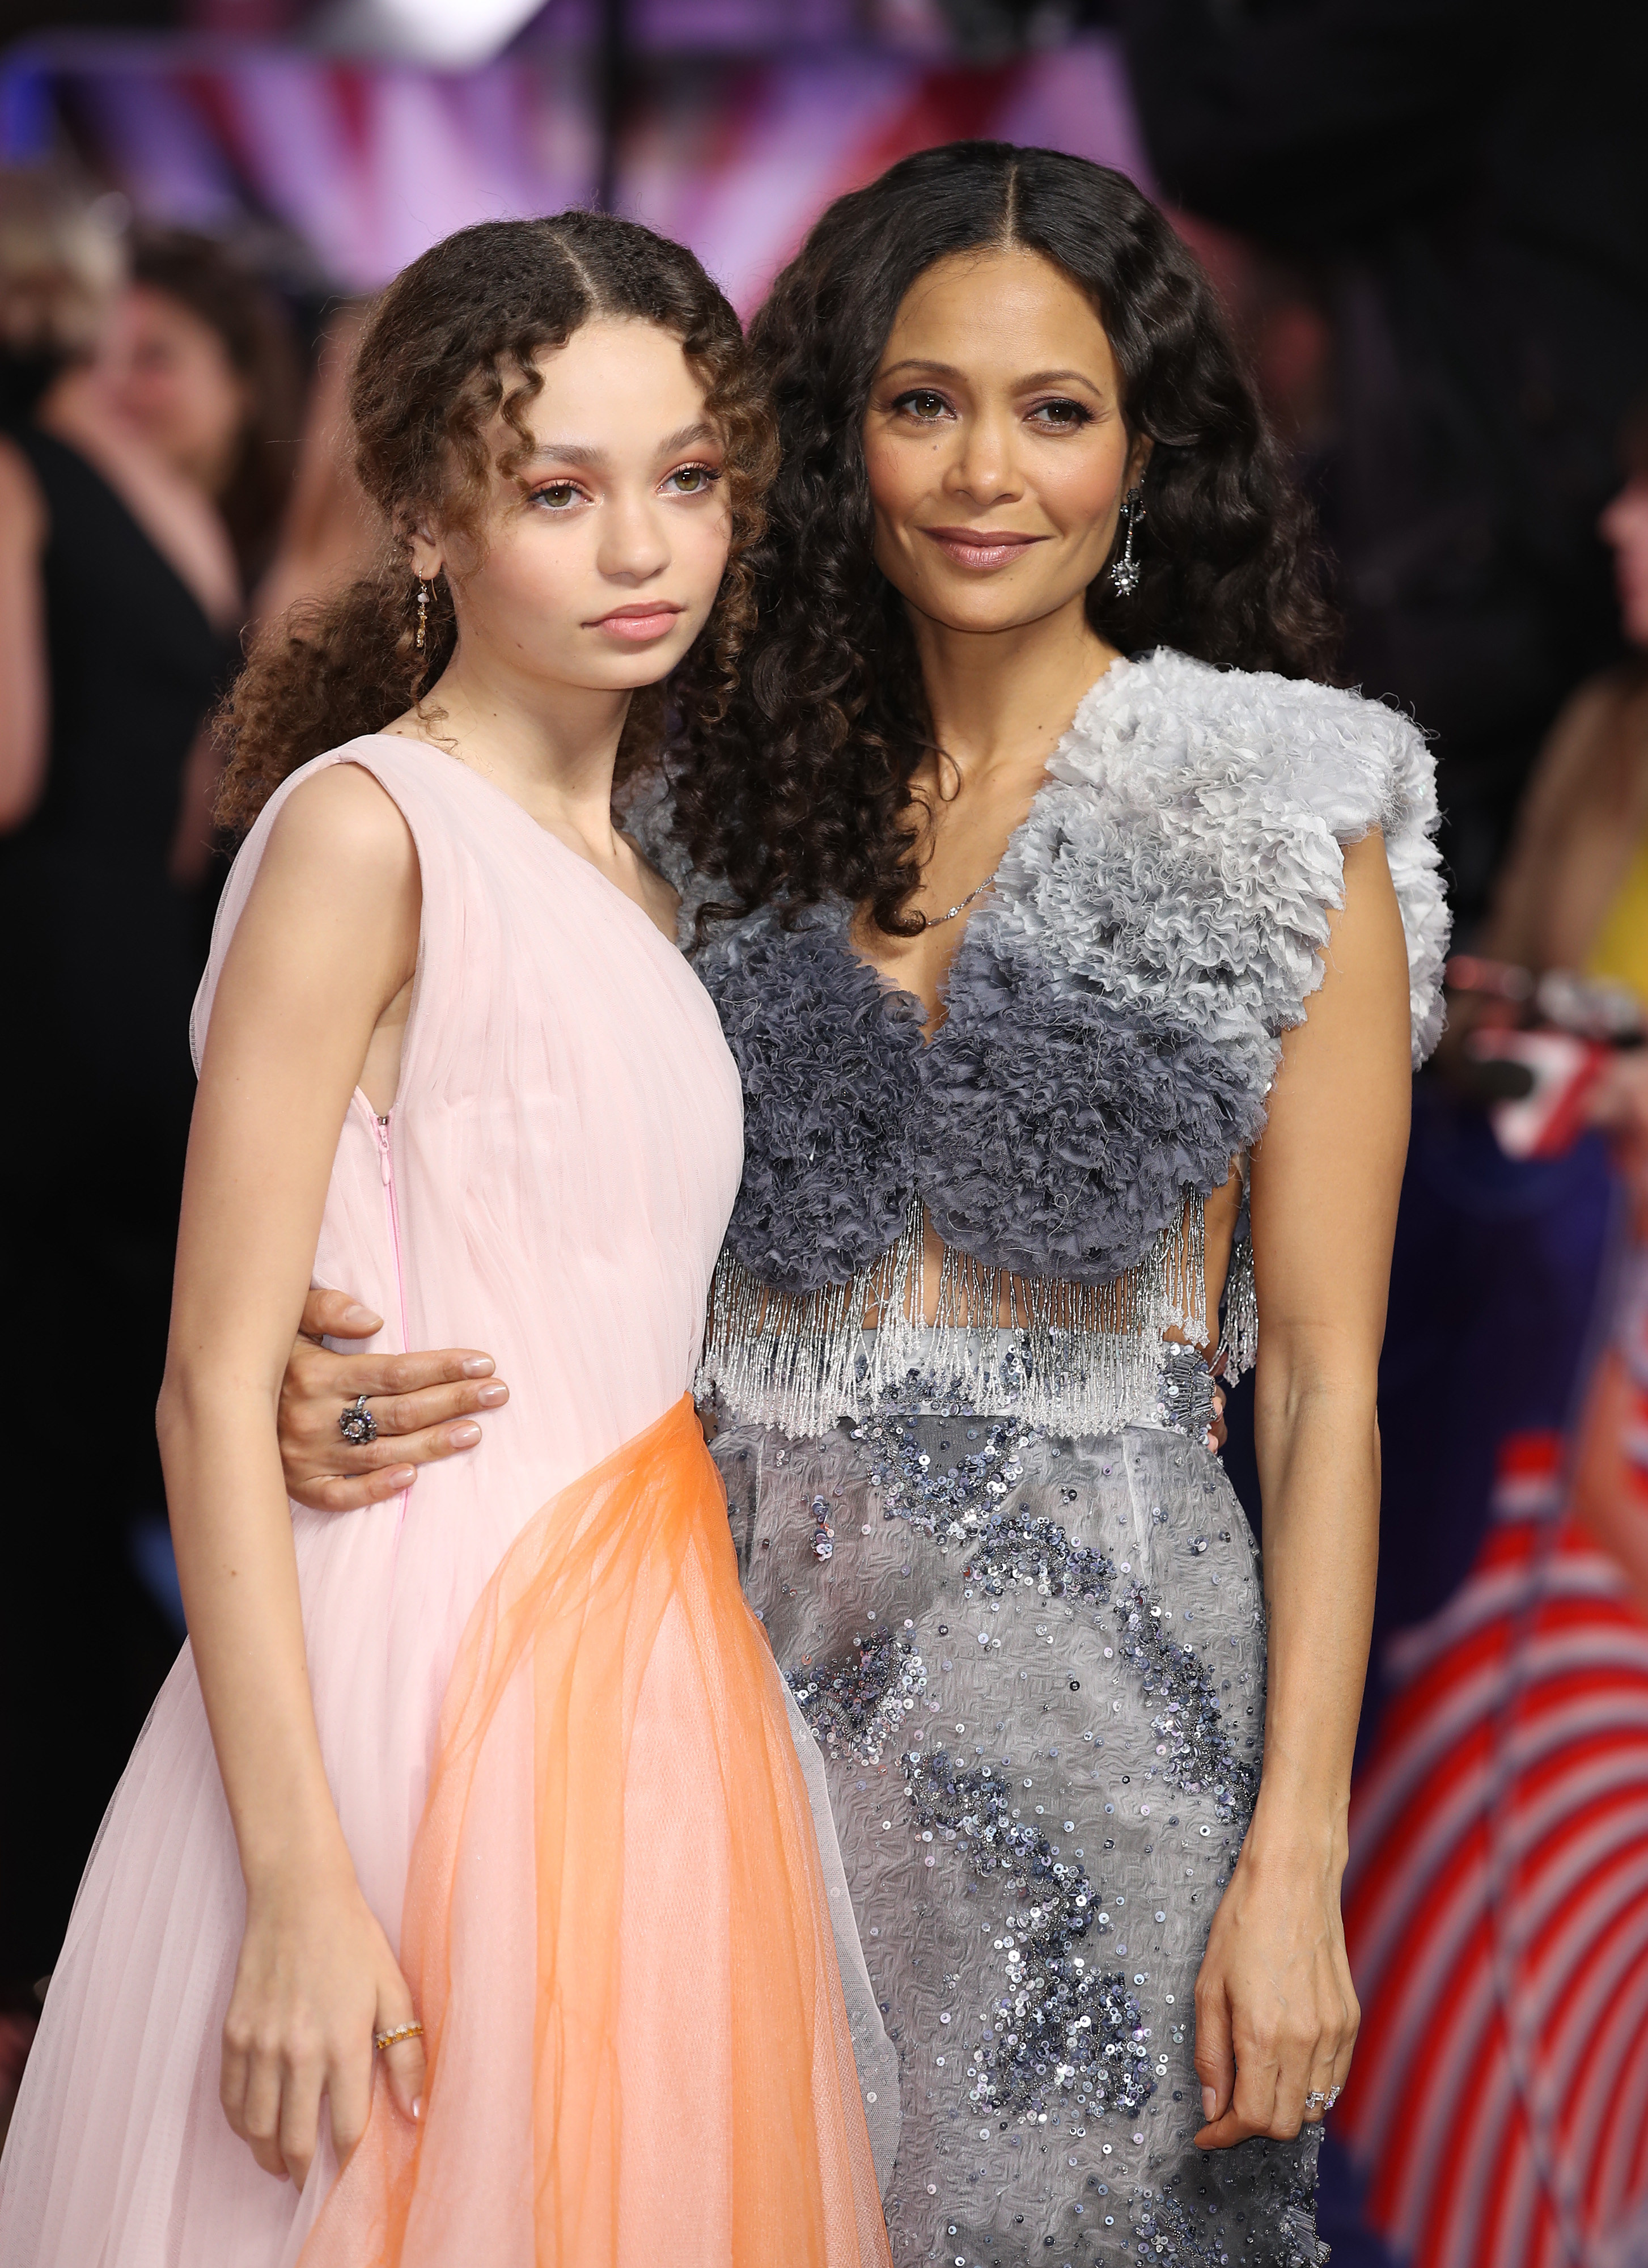 Nico on the red carpet with her mother